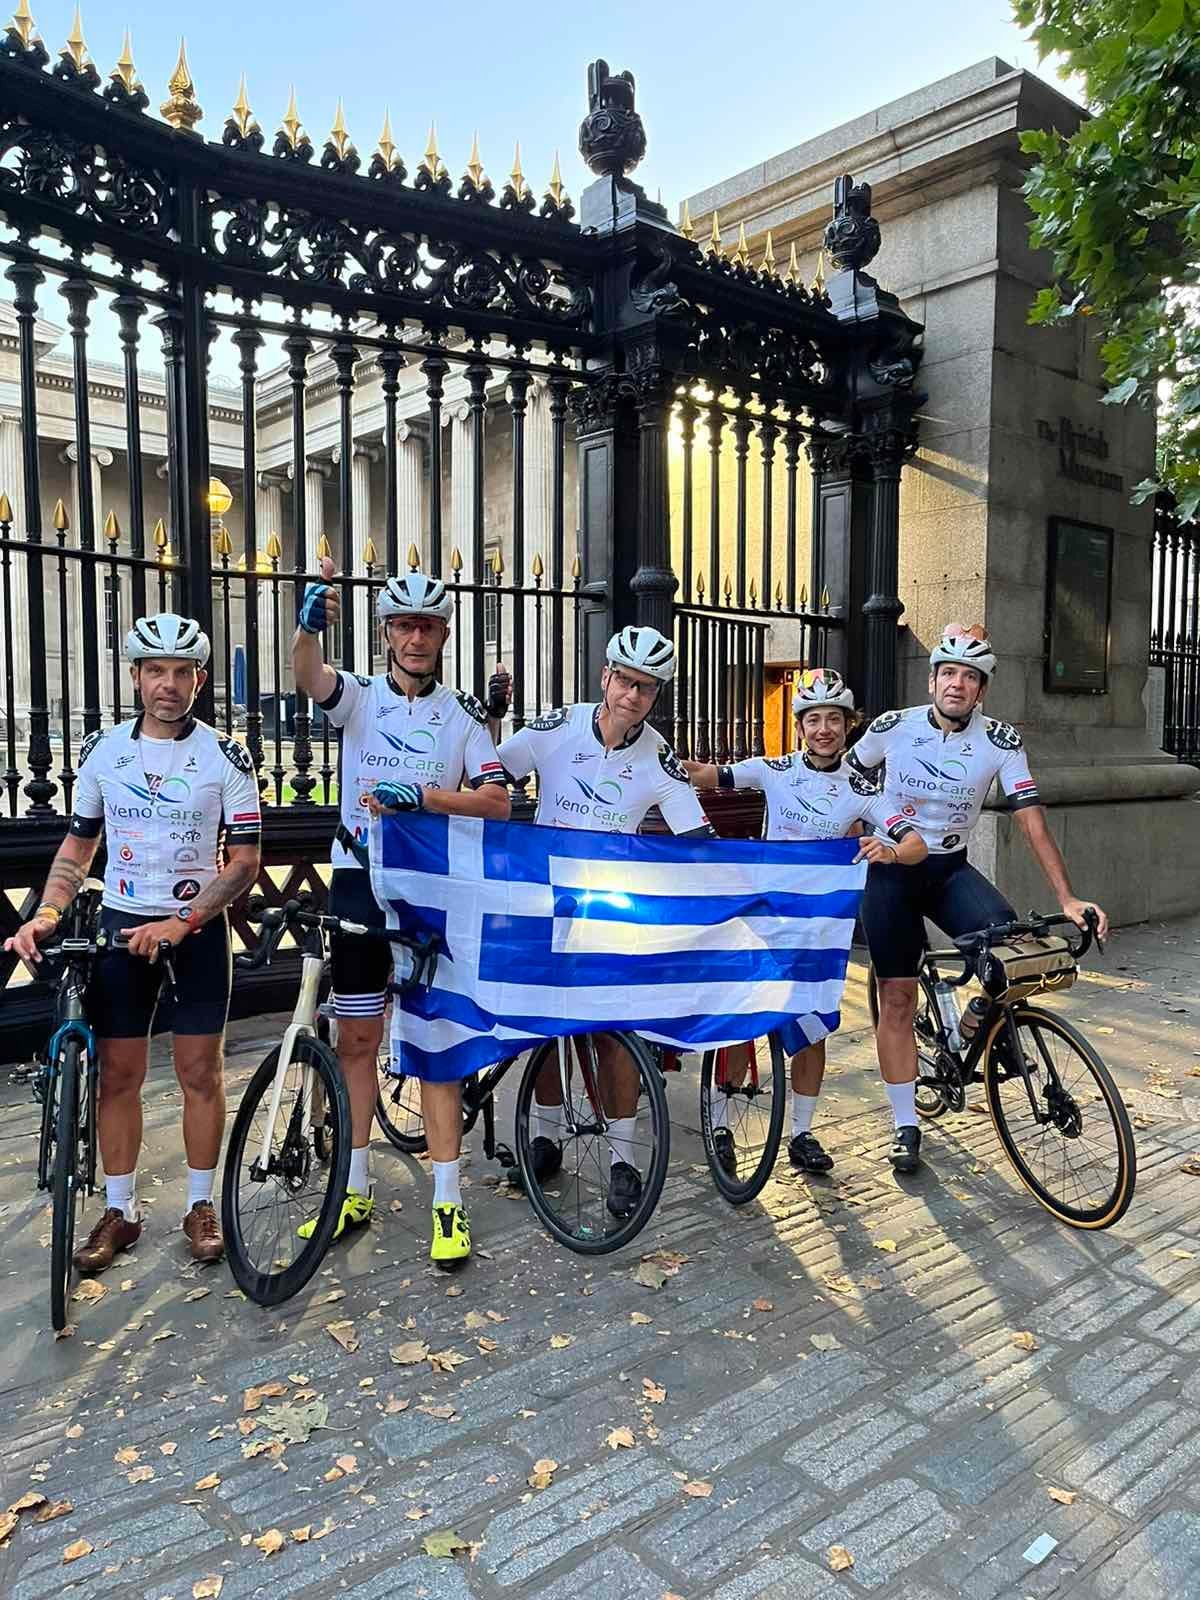 When Greek cyclists joined the campaign, the support was huge